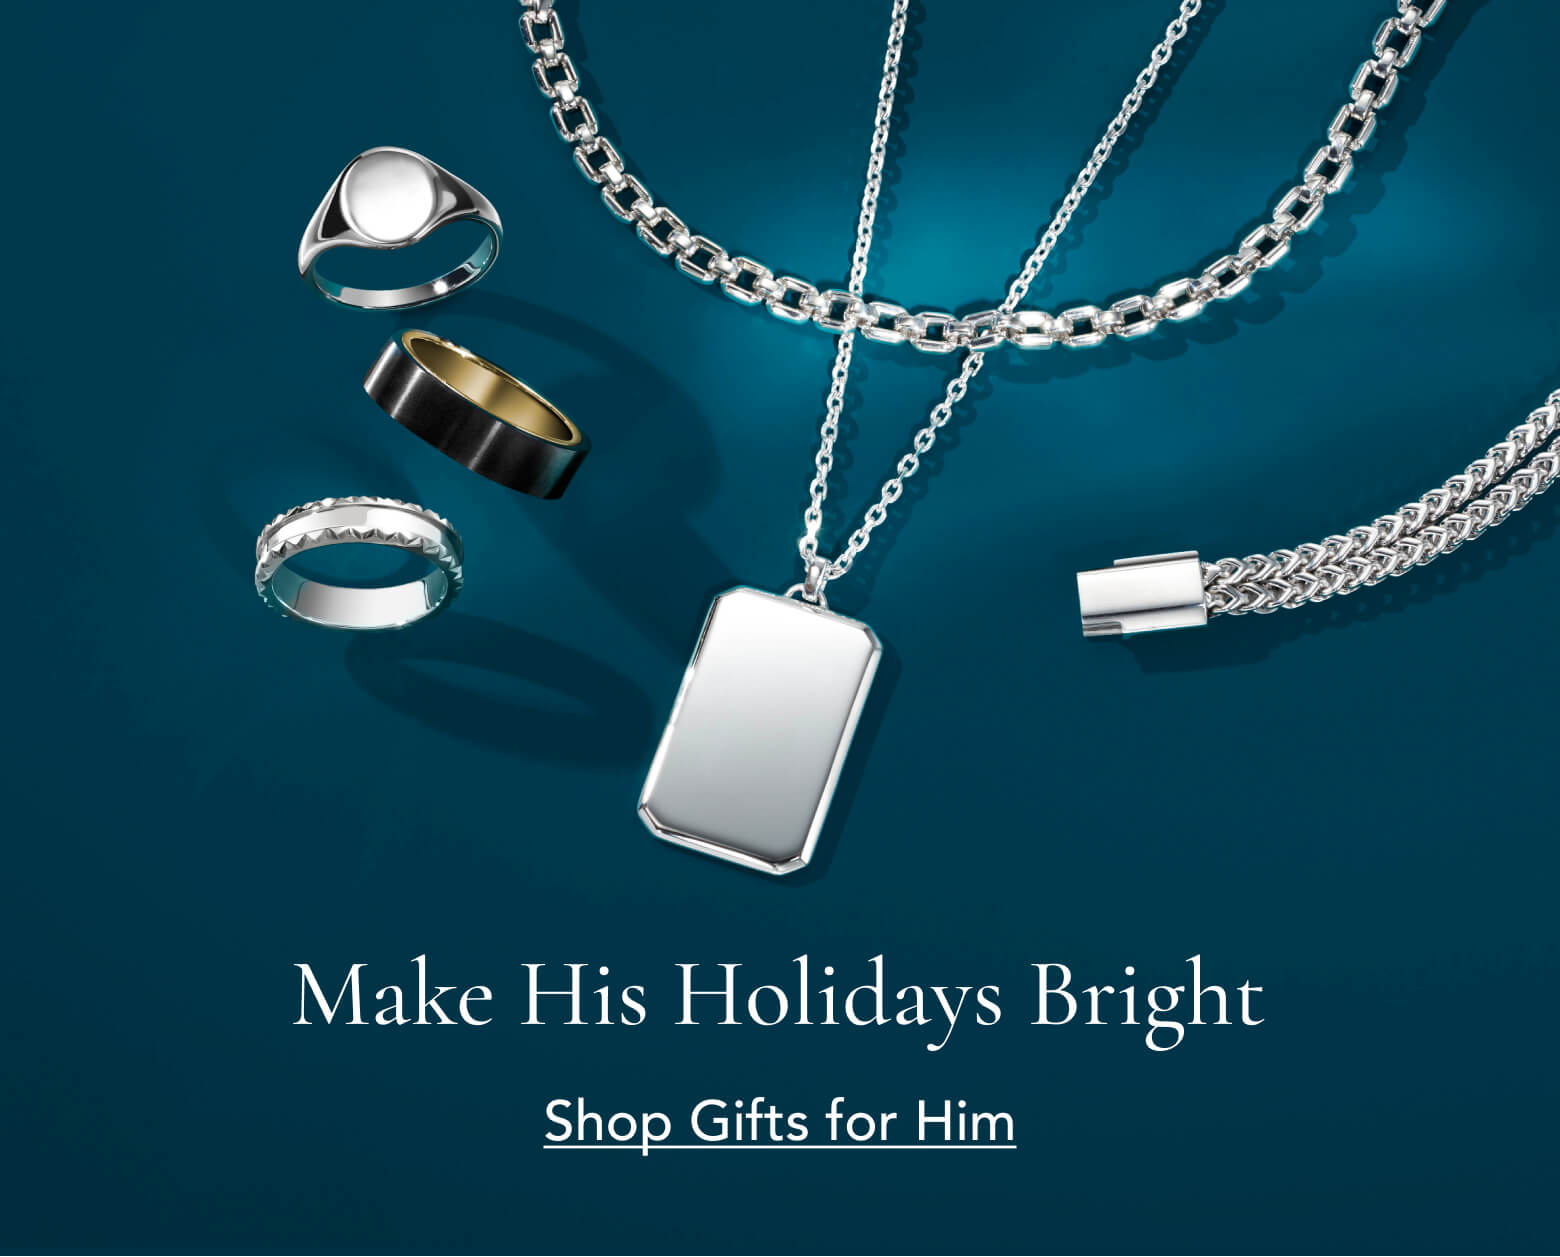 Embark Fine Jewelry: A Holiday Gift Guide for All Price Points